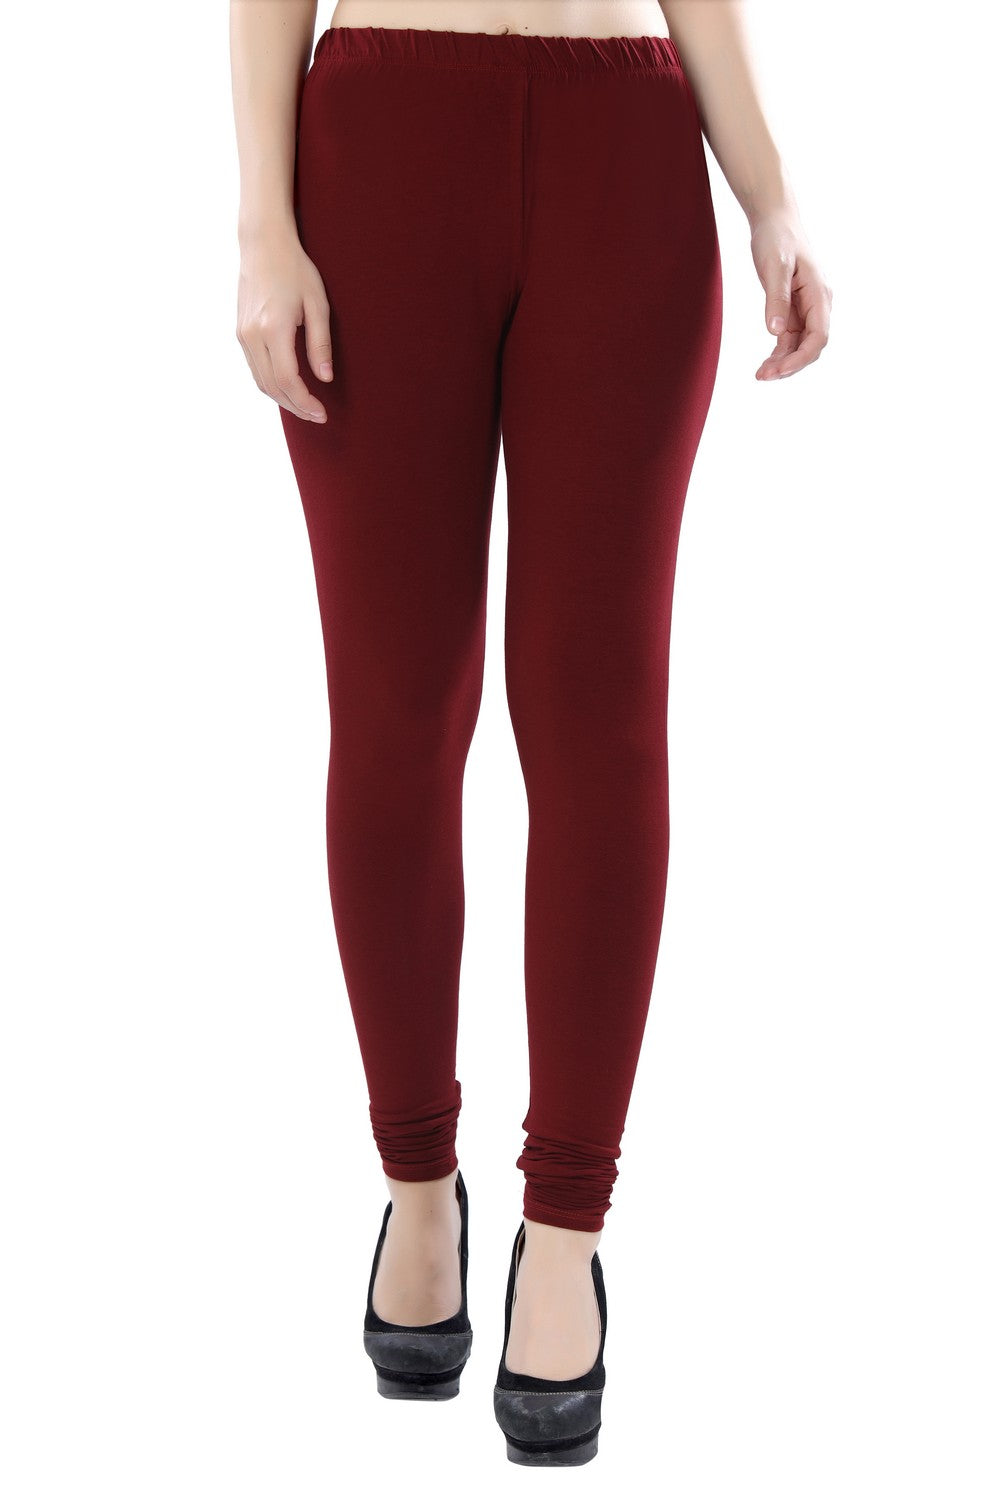 Mid Waist Women Leggings 4 Way Stretch Lycra, Casual Wear, Slim Fit at Rs  115 in Tiruppur